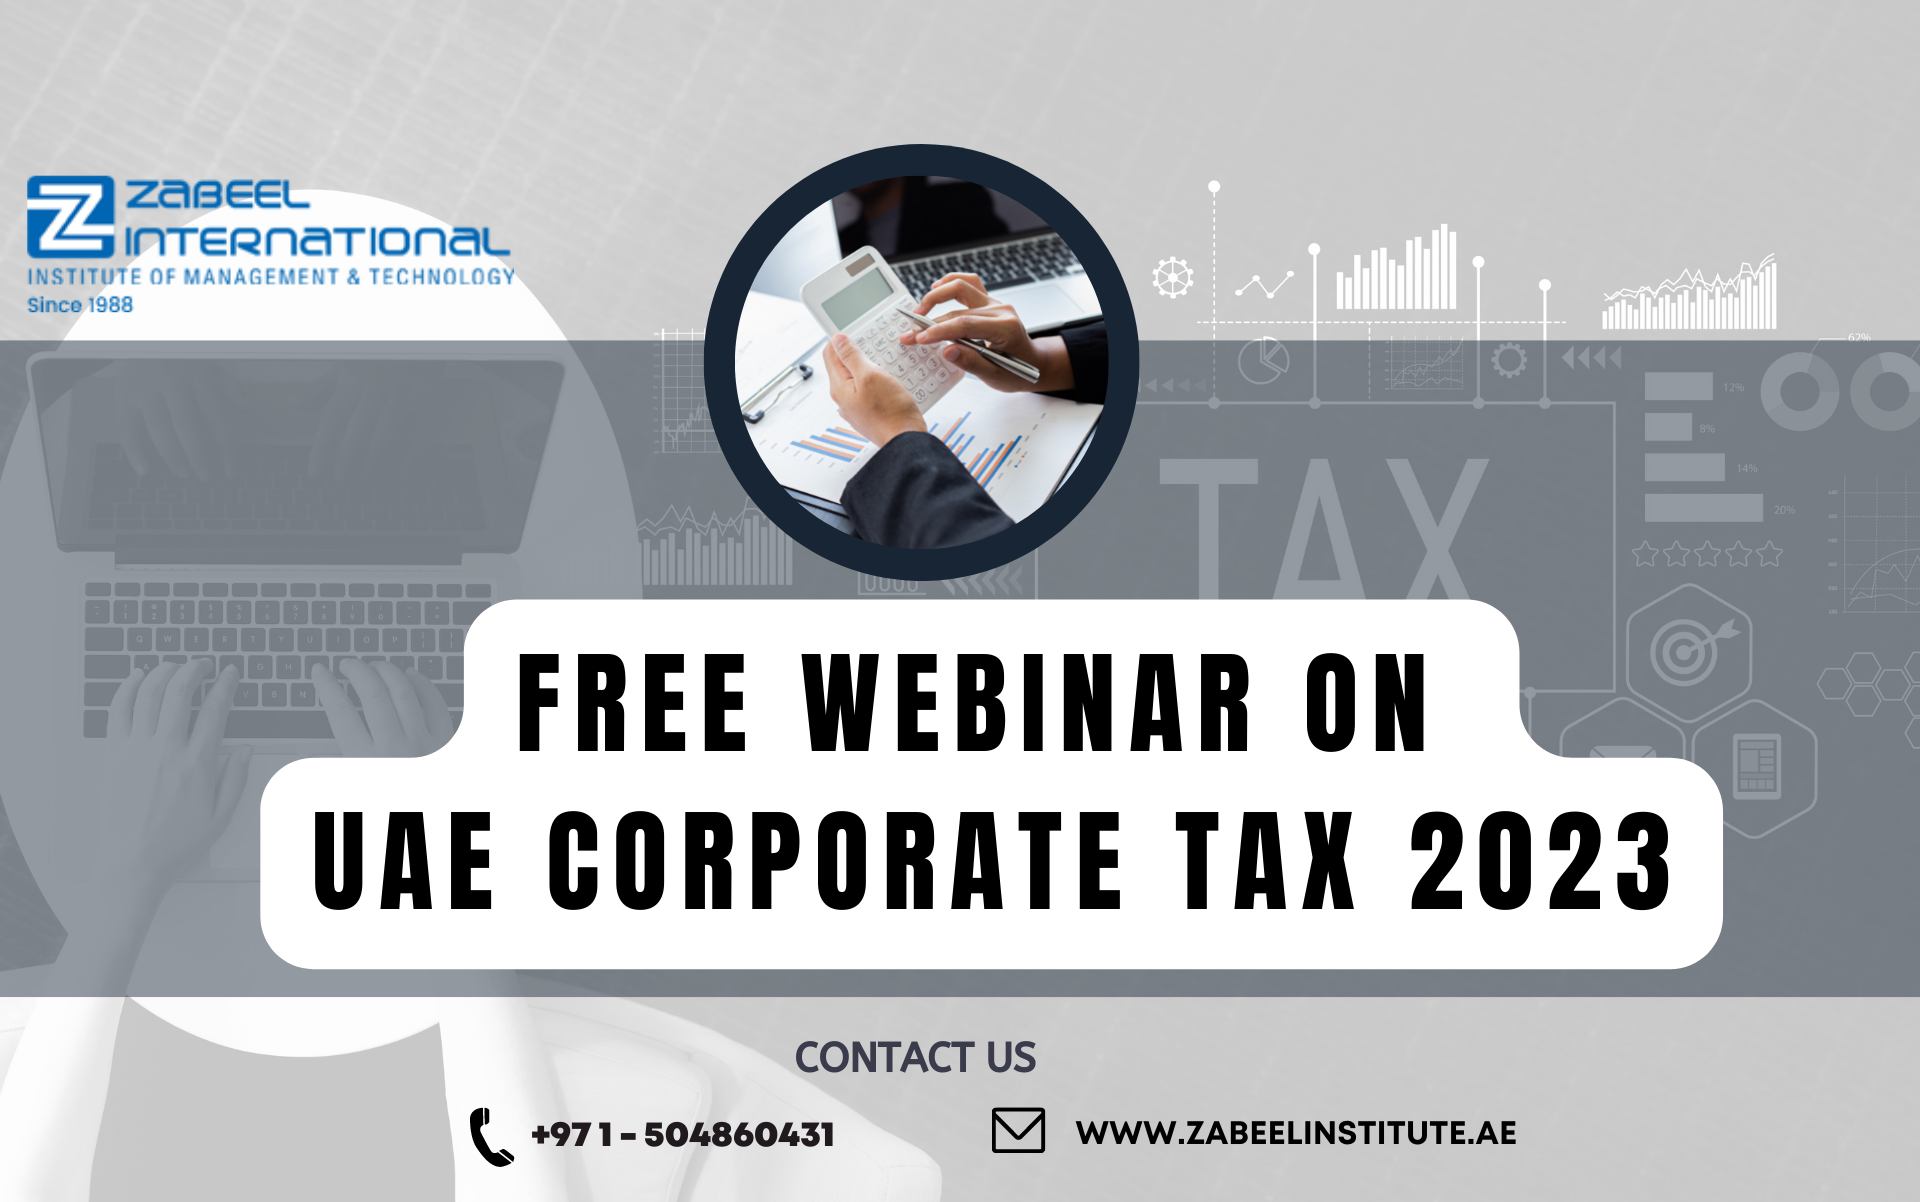 Introducing the UAE Corporate Tax 2023- Free Webinar, Online Event